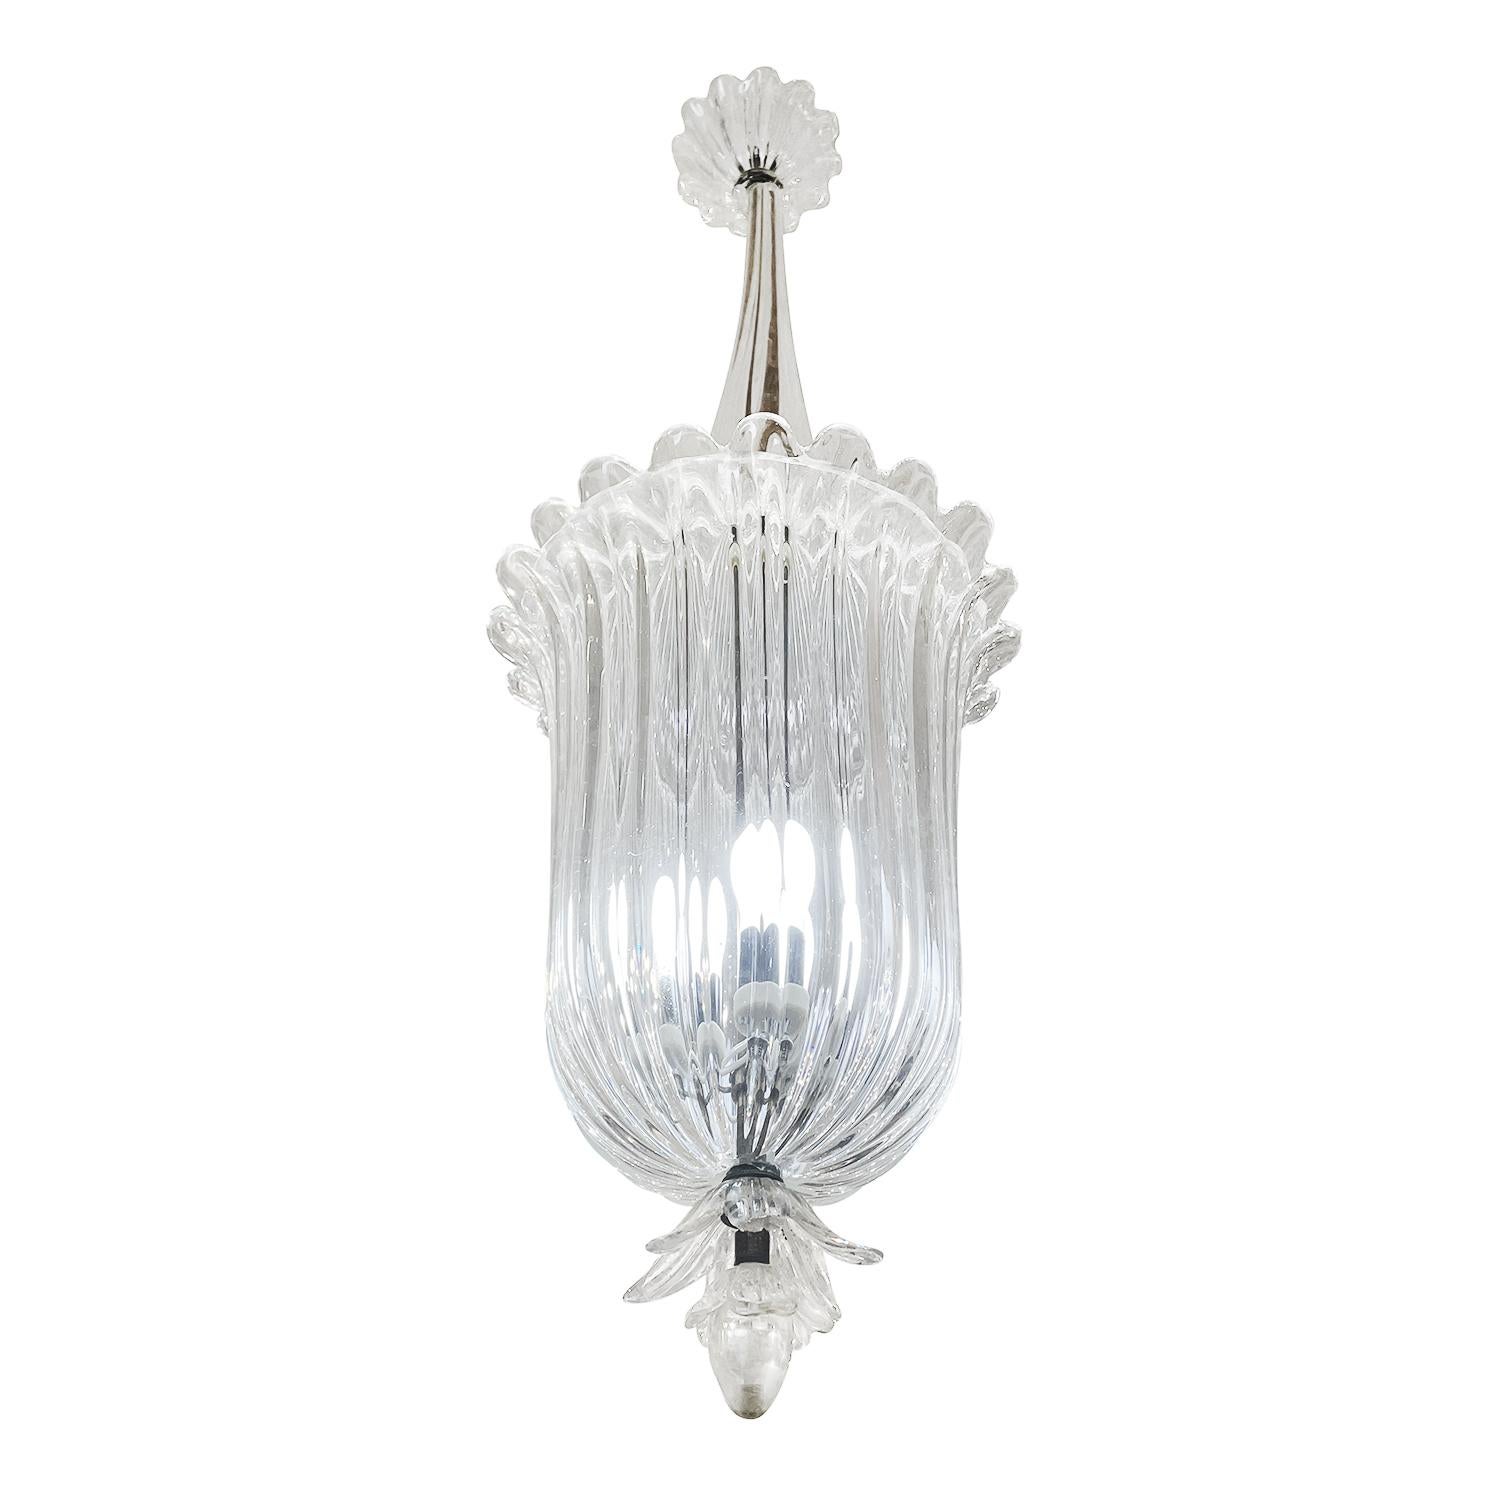 A vintage Mid-Century Modern Italian pendant made of hand blown clear Murano glass, designed and produced by Archimede Seguso and Seguso Vetri D’Arte, in good condition. The detailed round flower vase chandelier is supported by a brass beam,